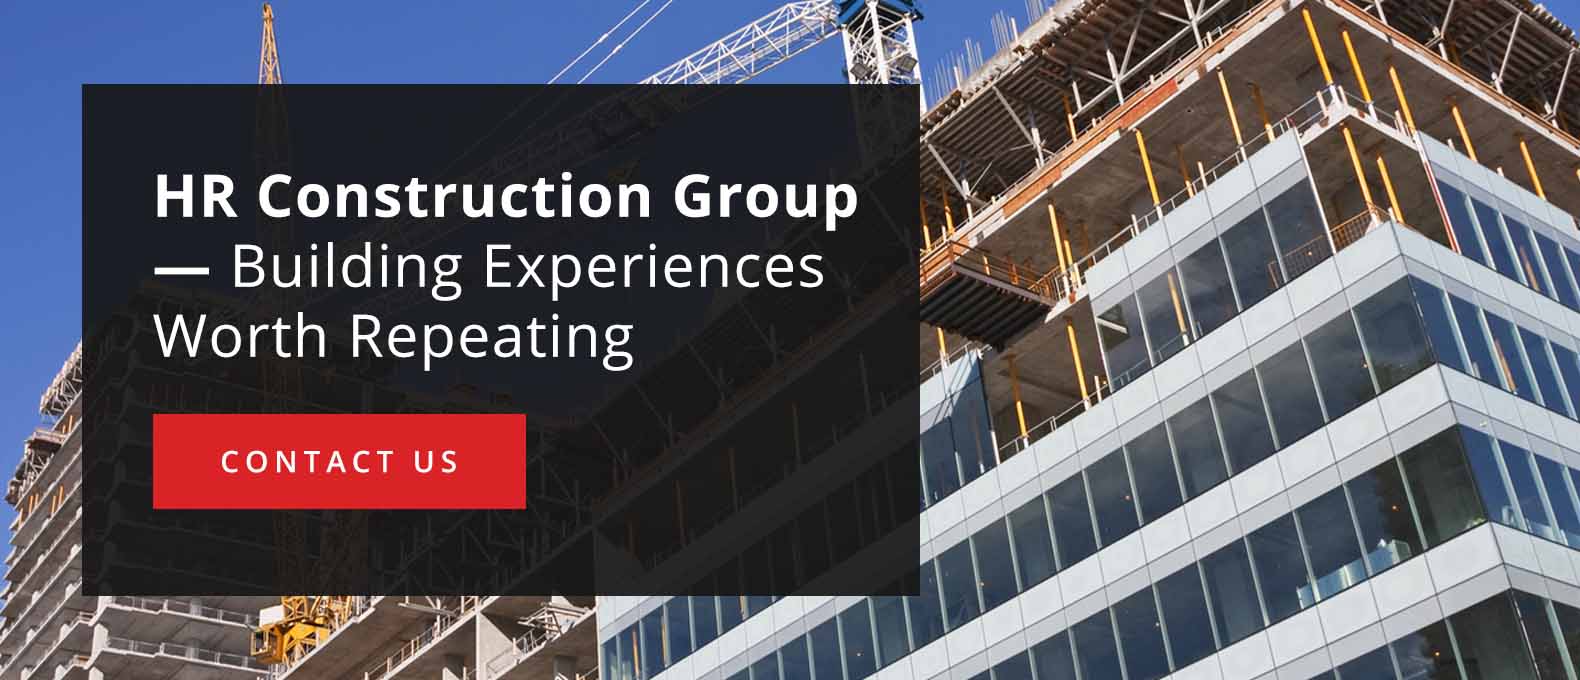 HR Construction Group - Building Experiences Worth Repeating